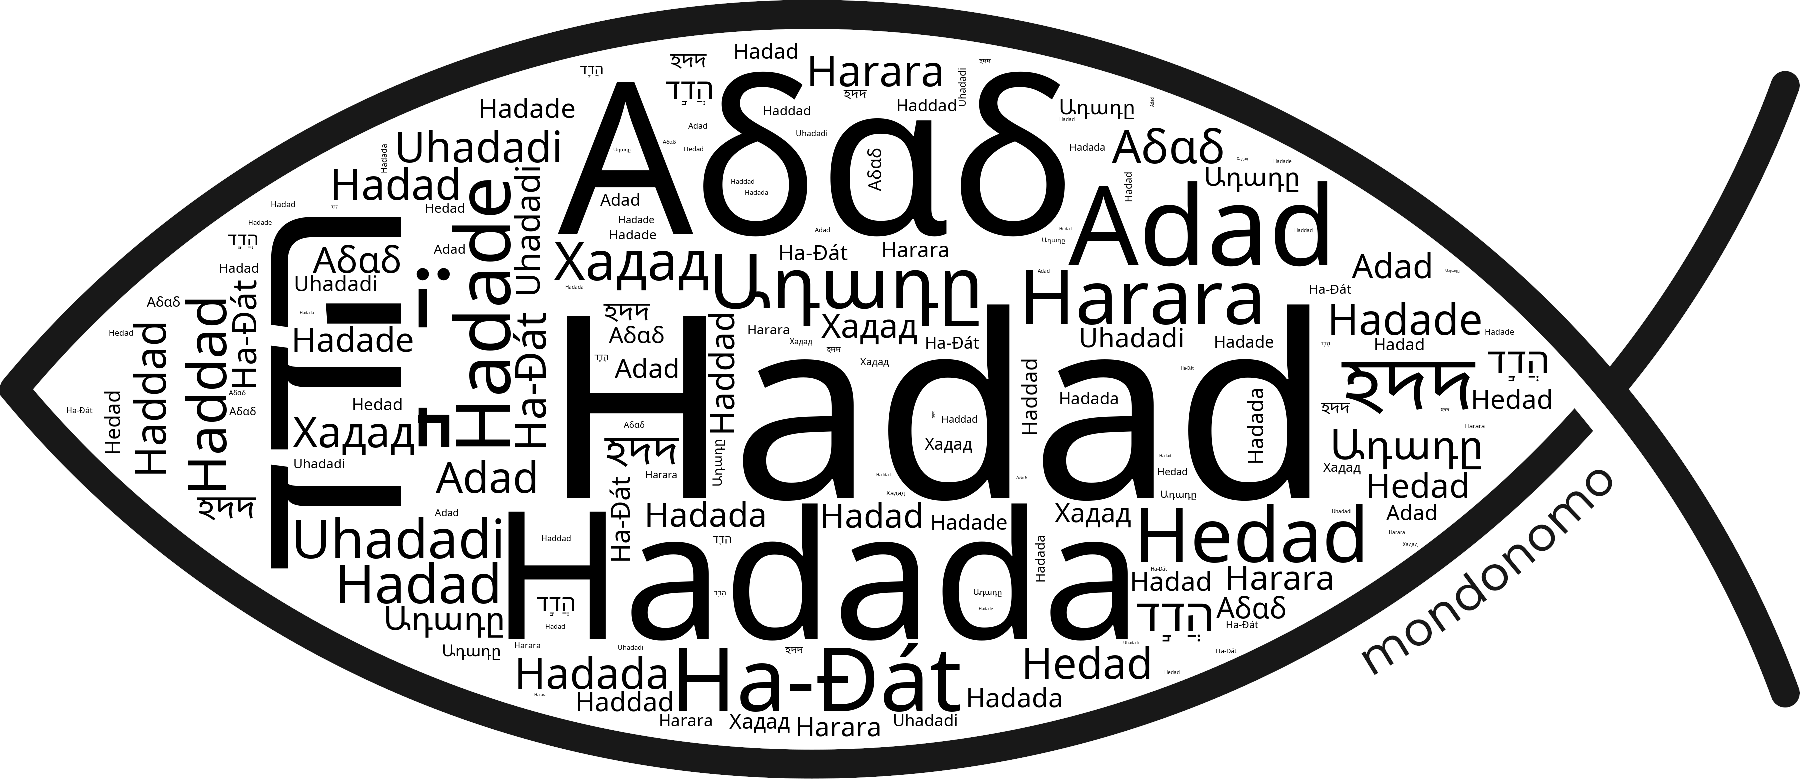 Name Hadad in the world's Bibles